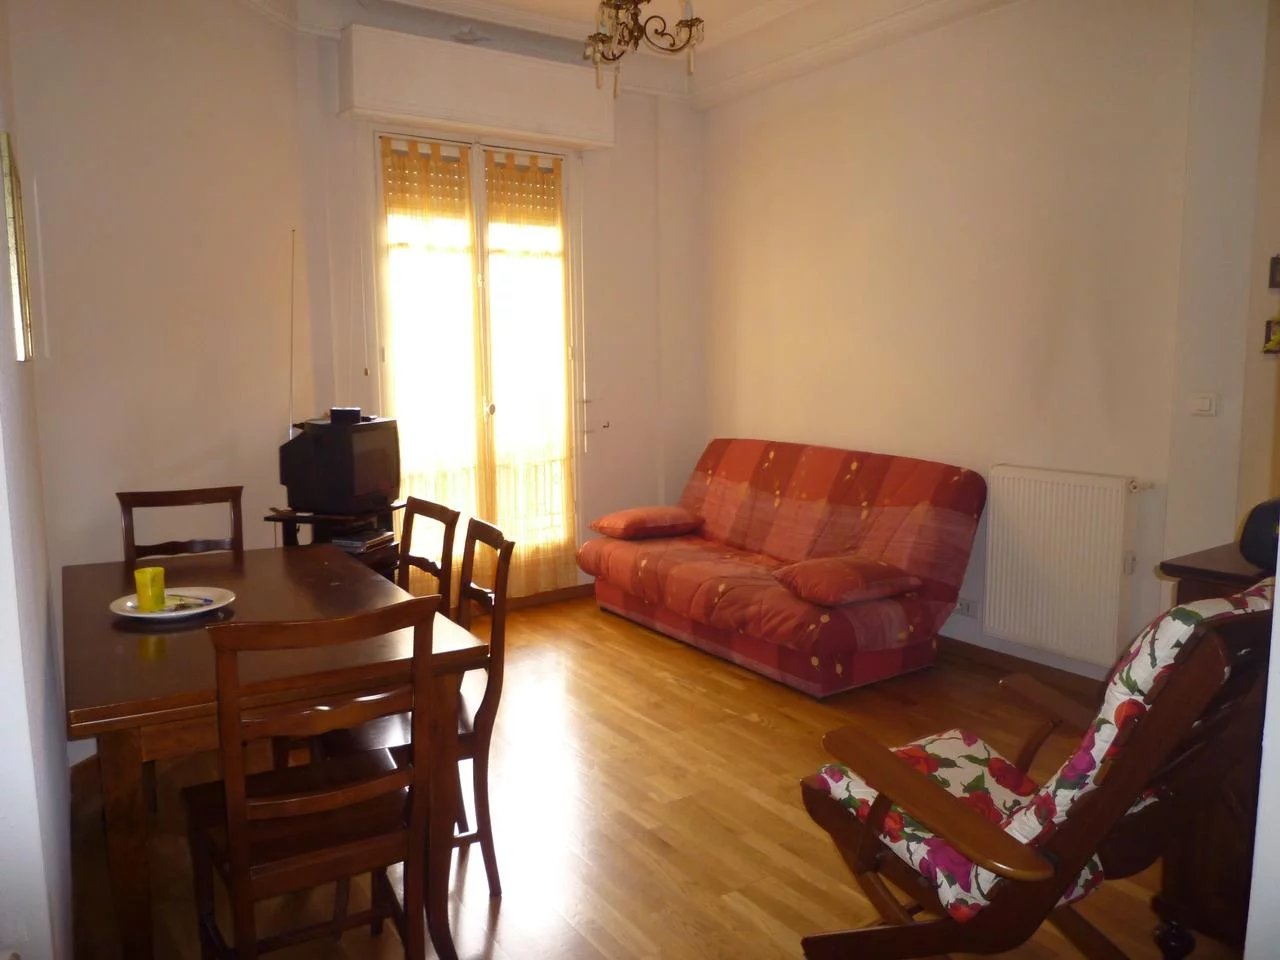 Appartement  2 Rooms 42.4m2  for sale   265 000 €